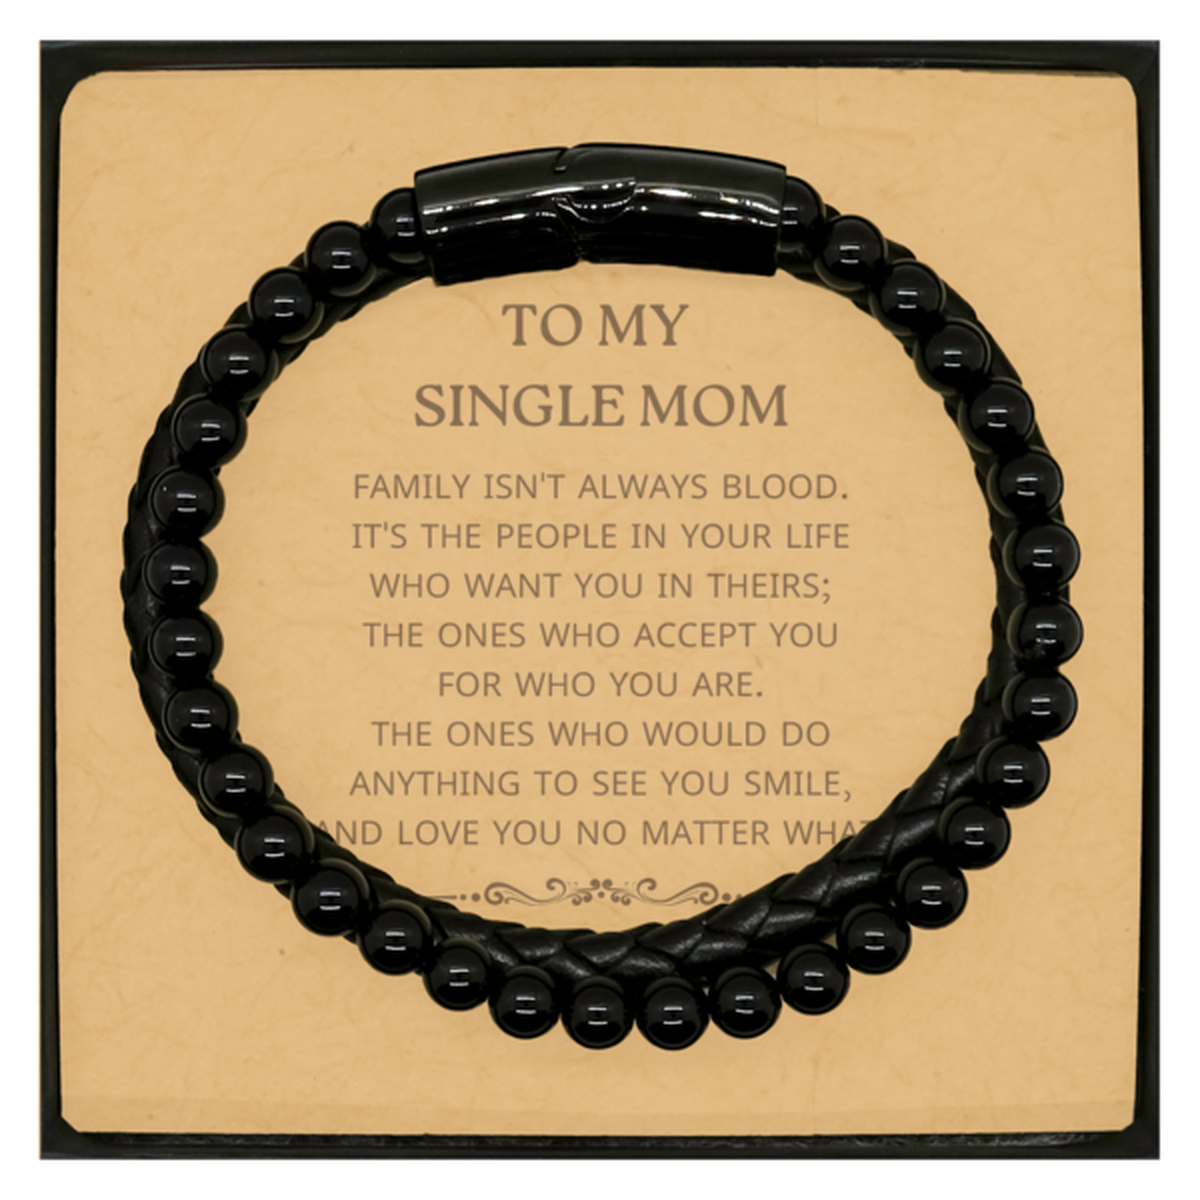 To My Single Mom Gifts, Family isn't always blood, Single Mom Stone Leather Bracelets, Birthday Christmas Unique Present For Single Mom